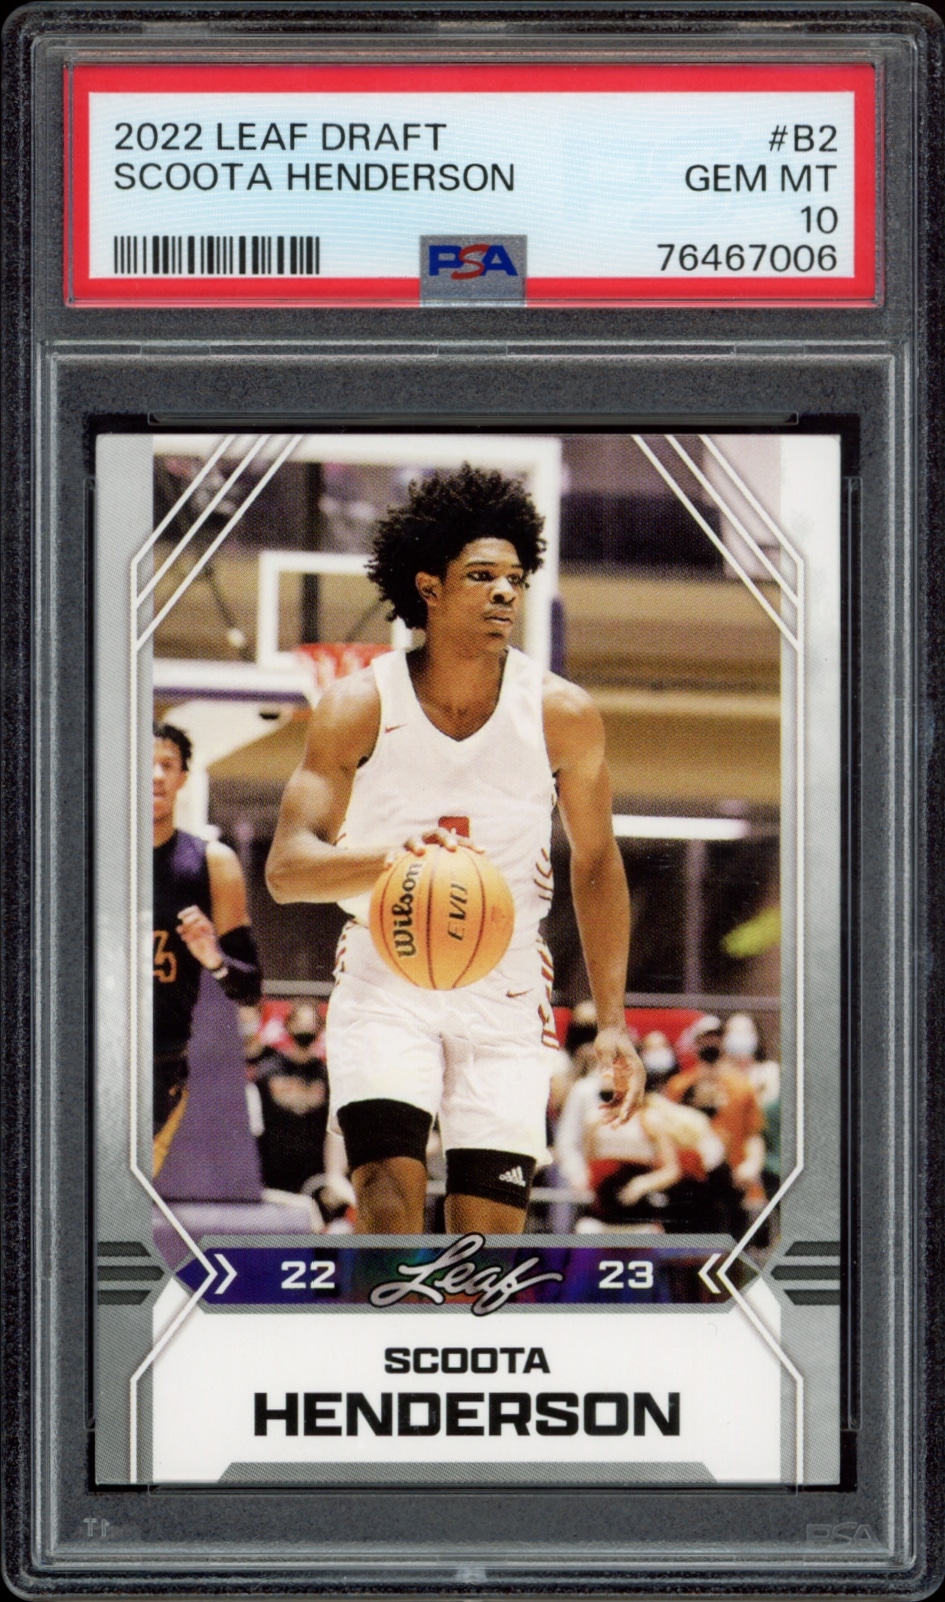 GEM MT 10 rated Scoot Hendersons 2022 Leaf Draft basketball trading card.